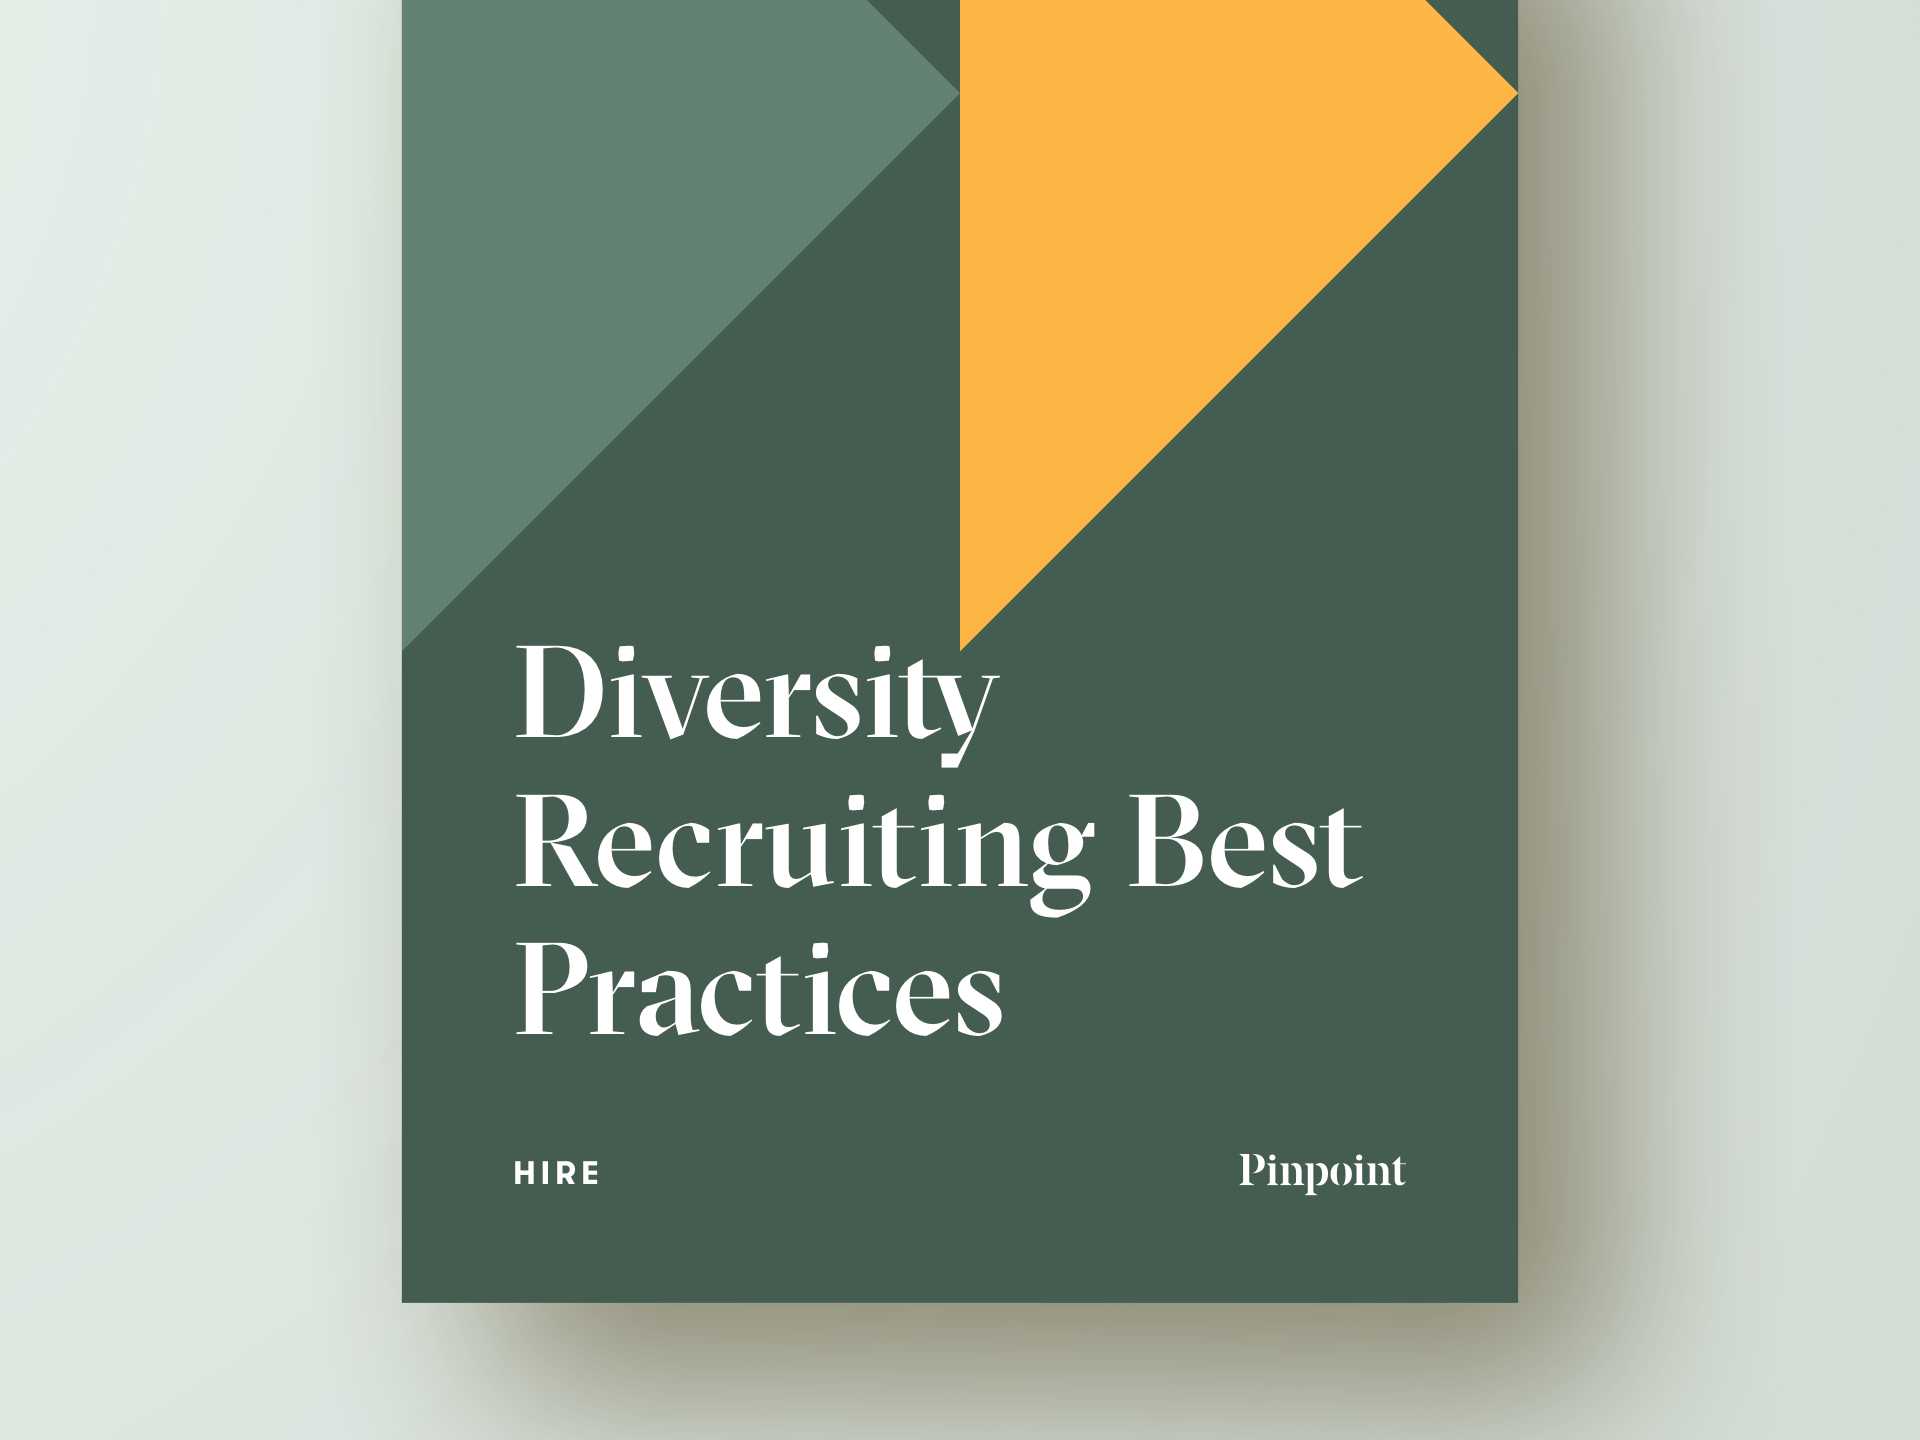 Want Diversity? 15 Recruiting Tactics To Attract A Wider Range Of Candidates